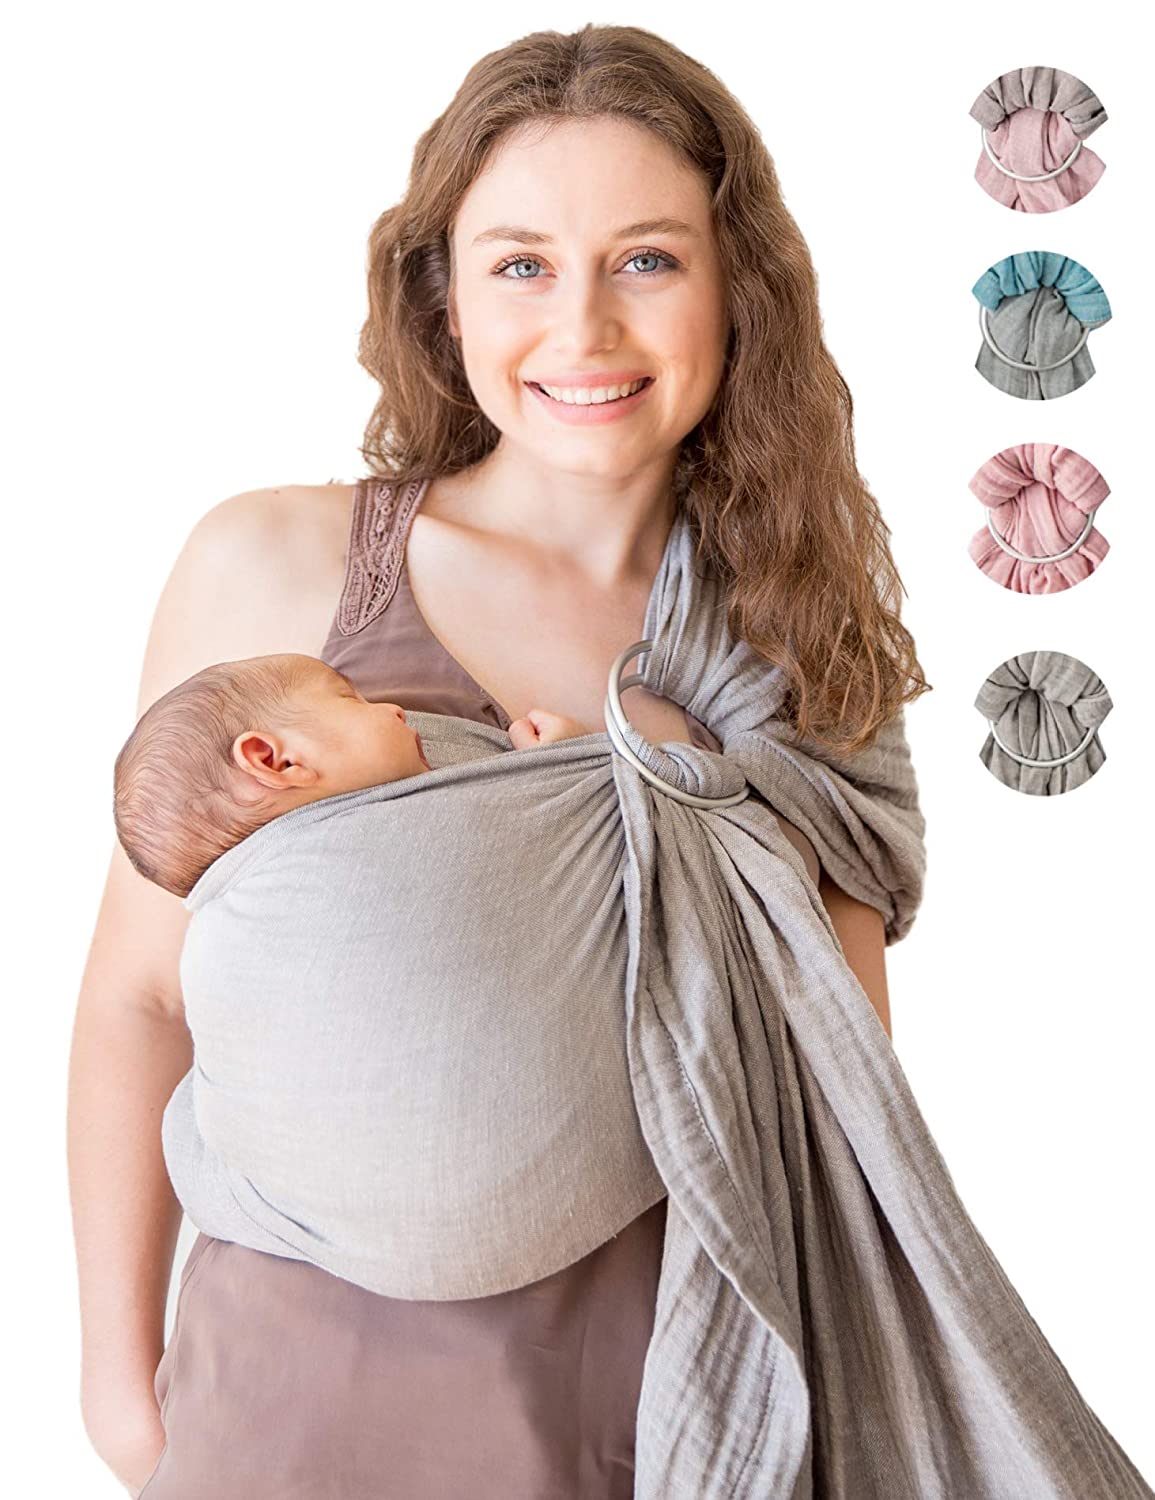 MEBIEN. TOUCHE DE LA NATURE… Baby Sling and Ring Sling 100% Cotton Muslin Infant Carrier, Ring Sling Baby Carrier Front and Chest Newborn Carrier Baby Carrier Wrap Toddler Carrier - Grey